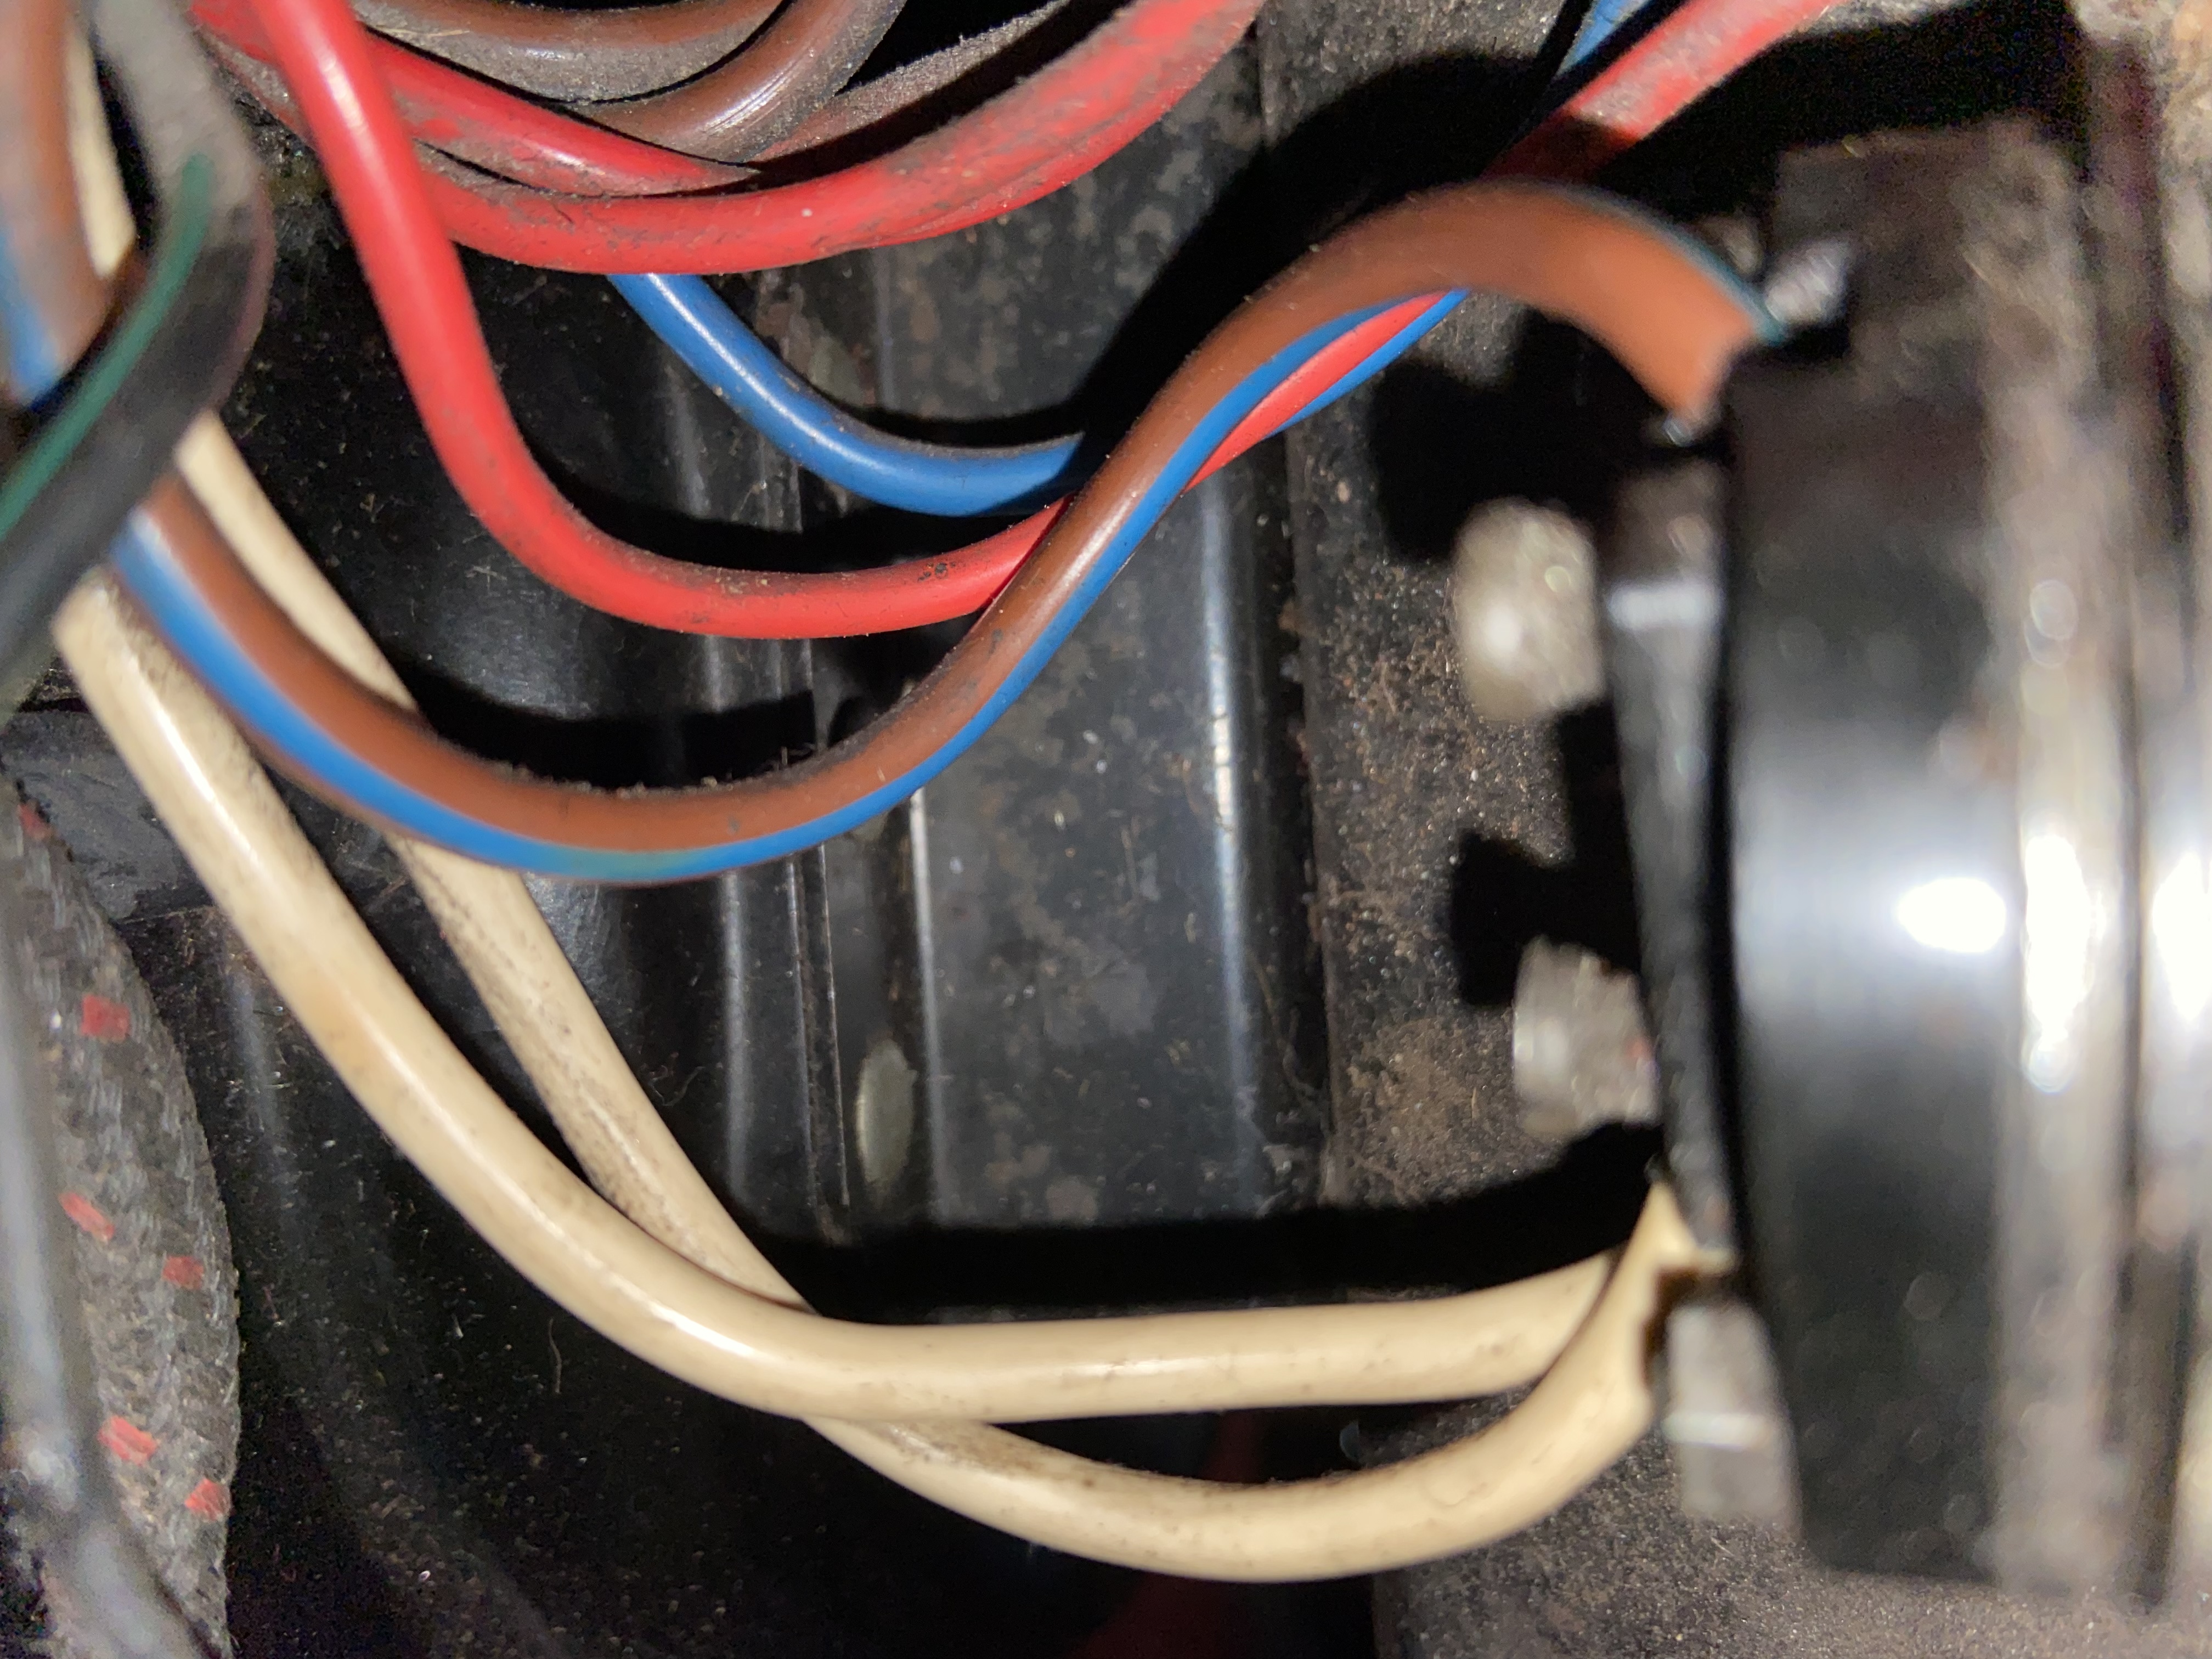 Pic of ignition switch wiring